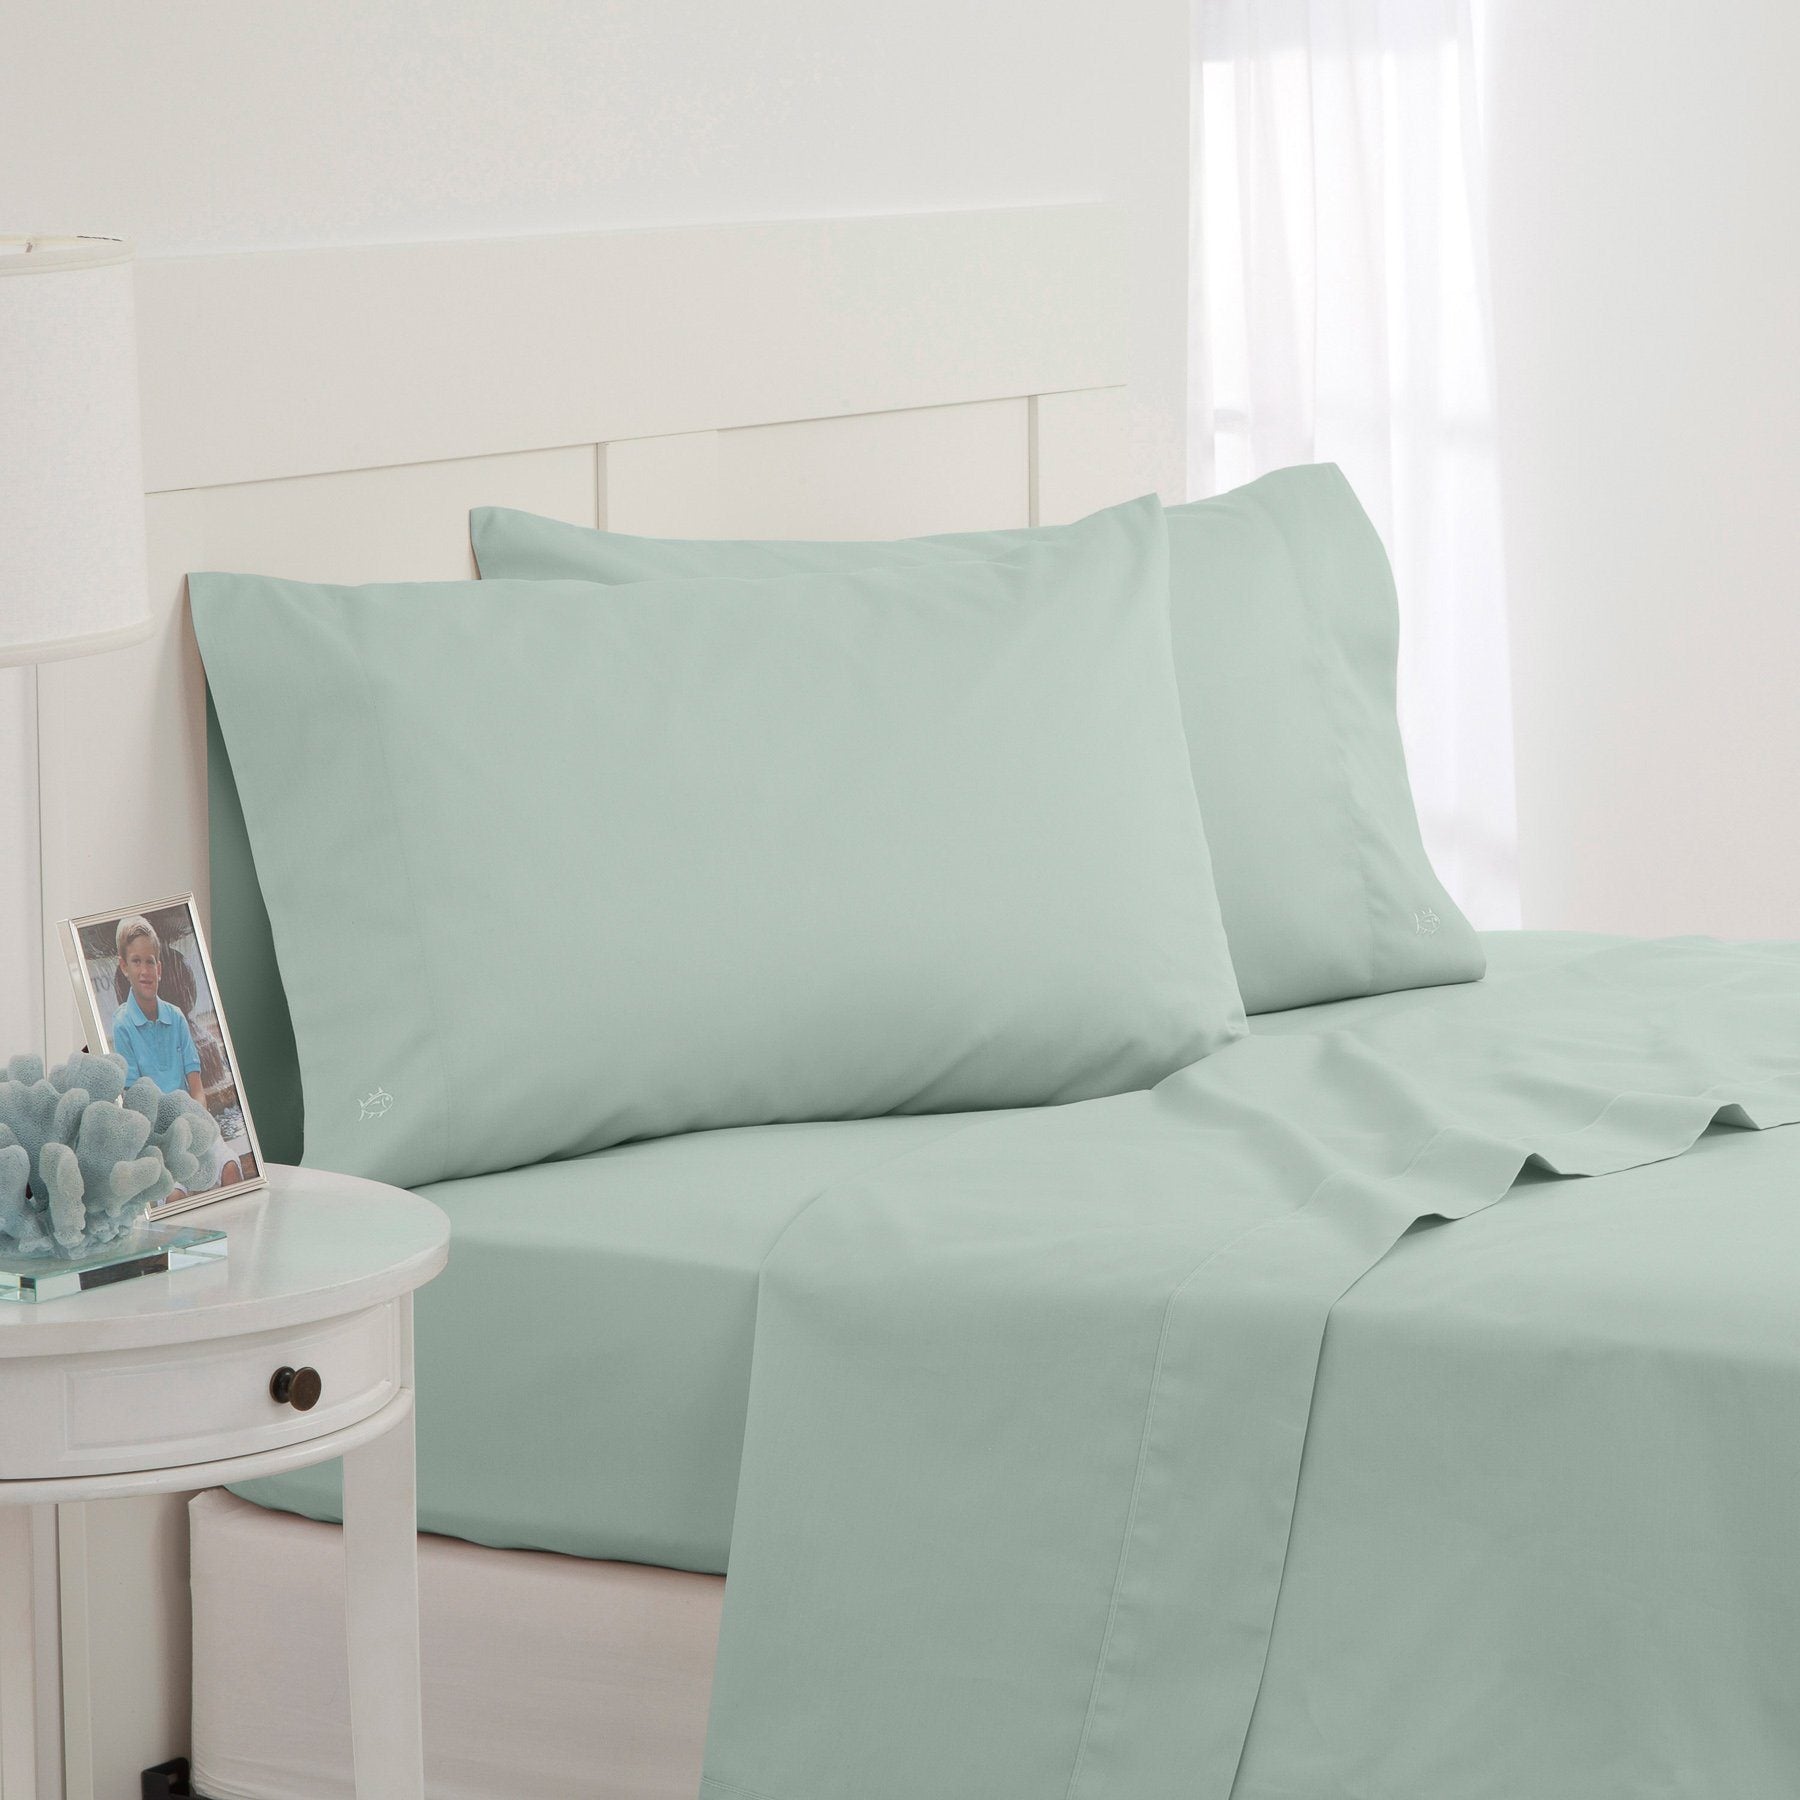 Cotton Solid Colored Bed Sheet Set